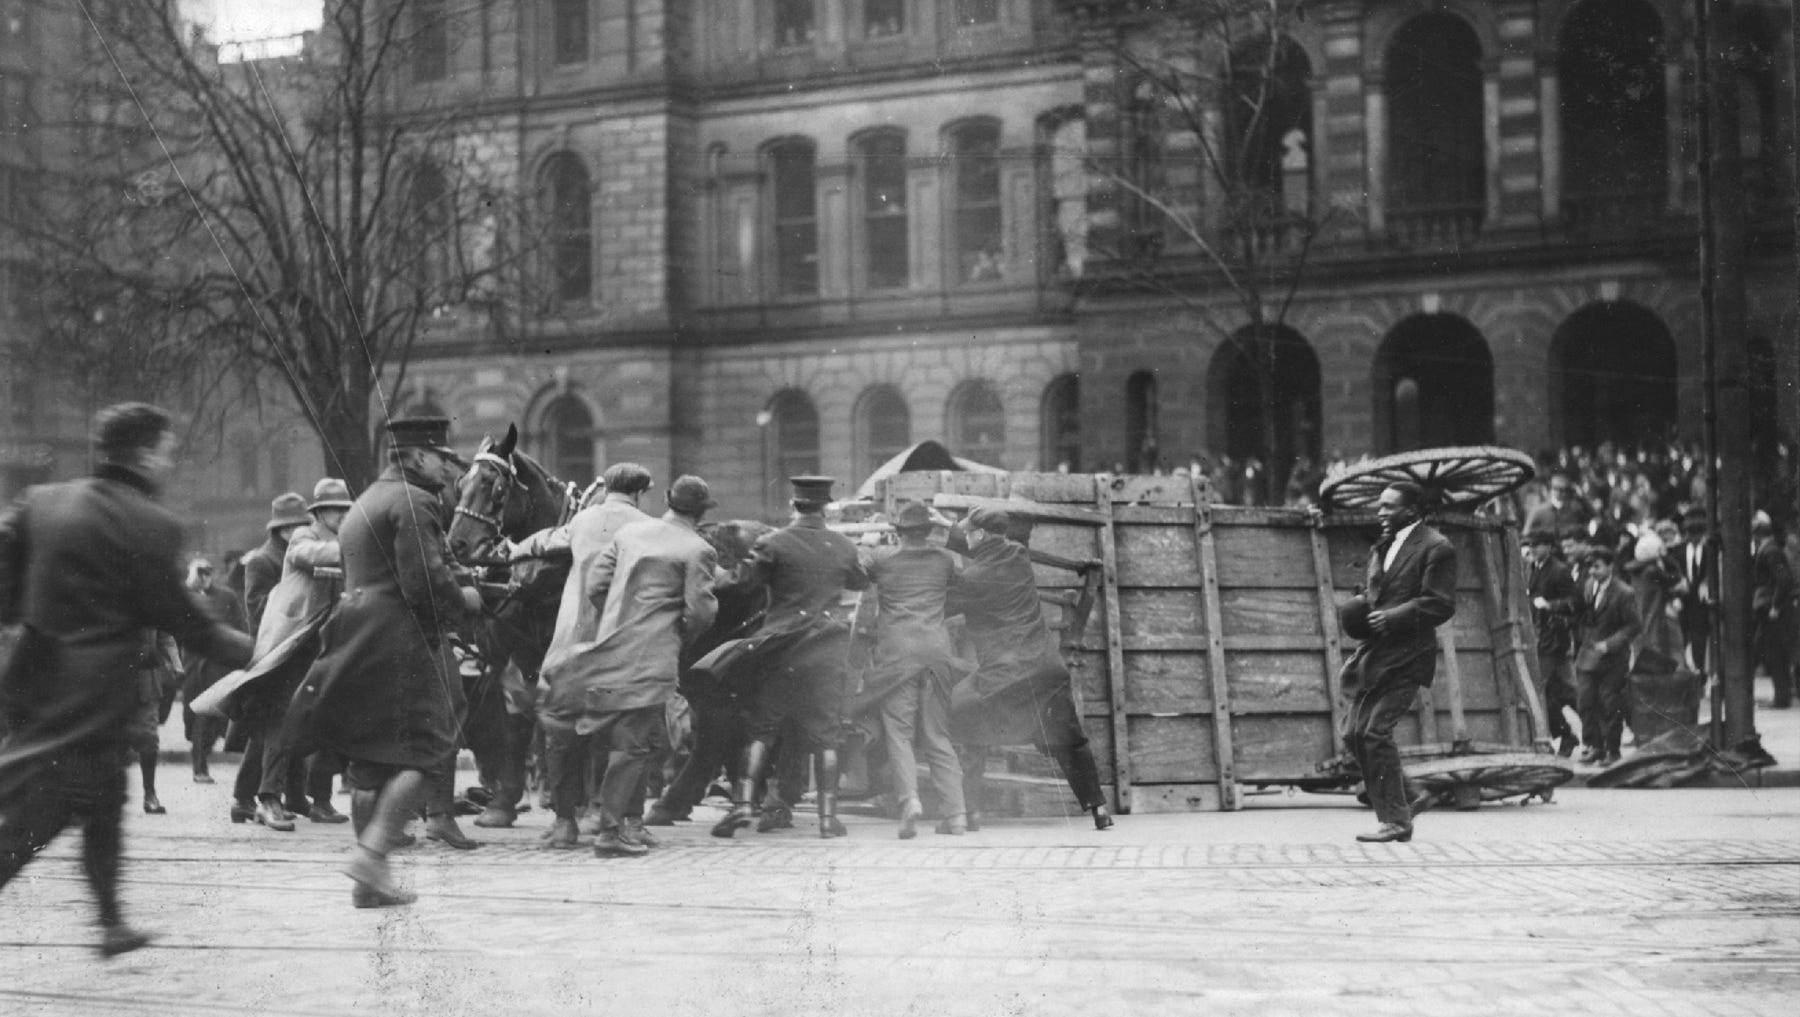 Citizens and police officers in downtown Detroit try to hold horses and flip a wagon that overturned in the high winds. The slow pace of weather reports would contribute to ships being surprised by the ferocity of the storm in the Great Lakes.